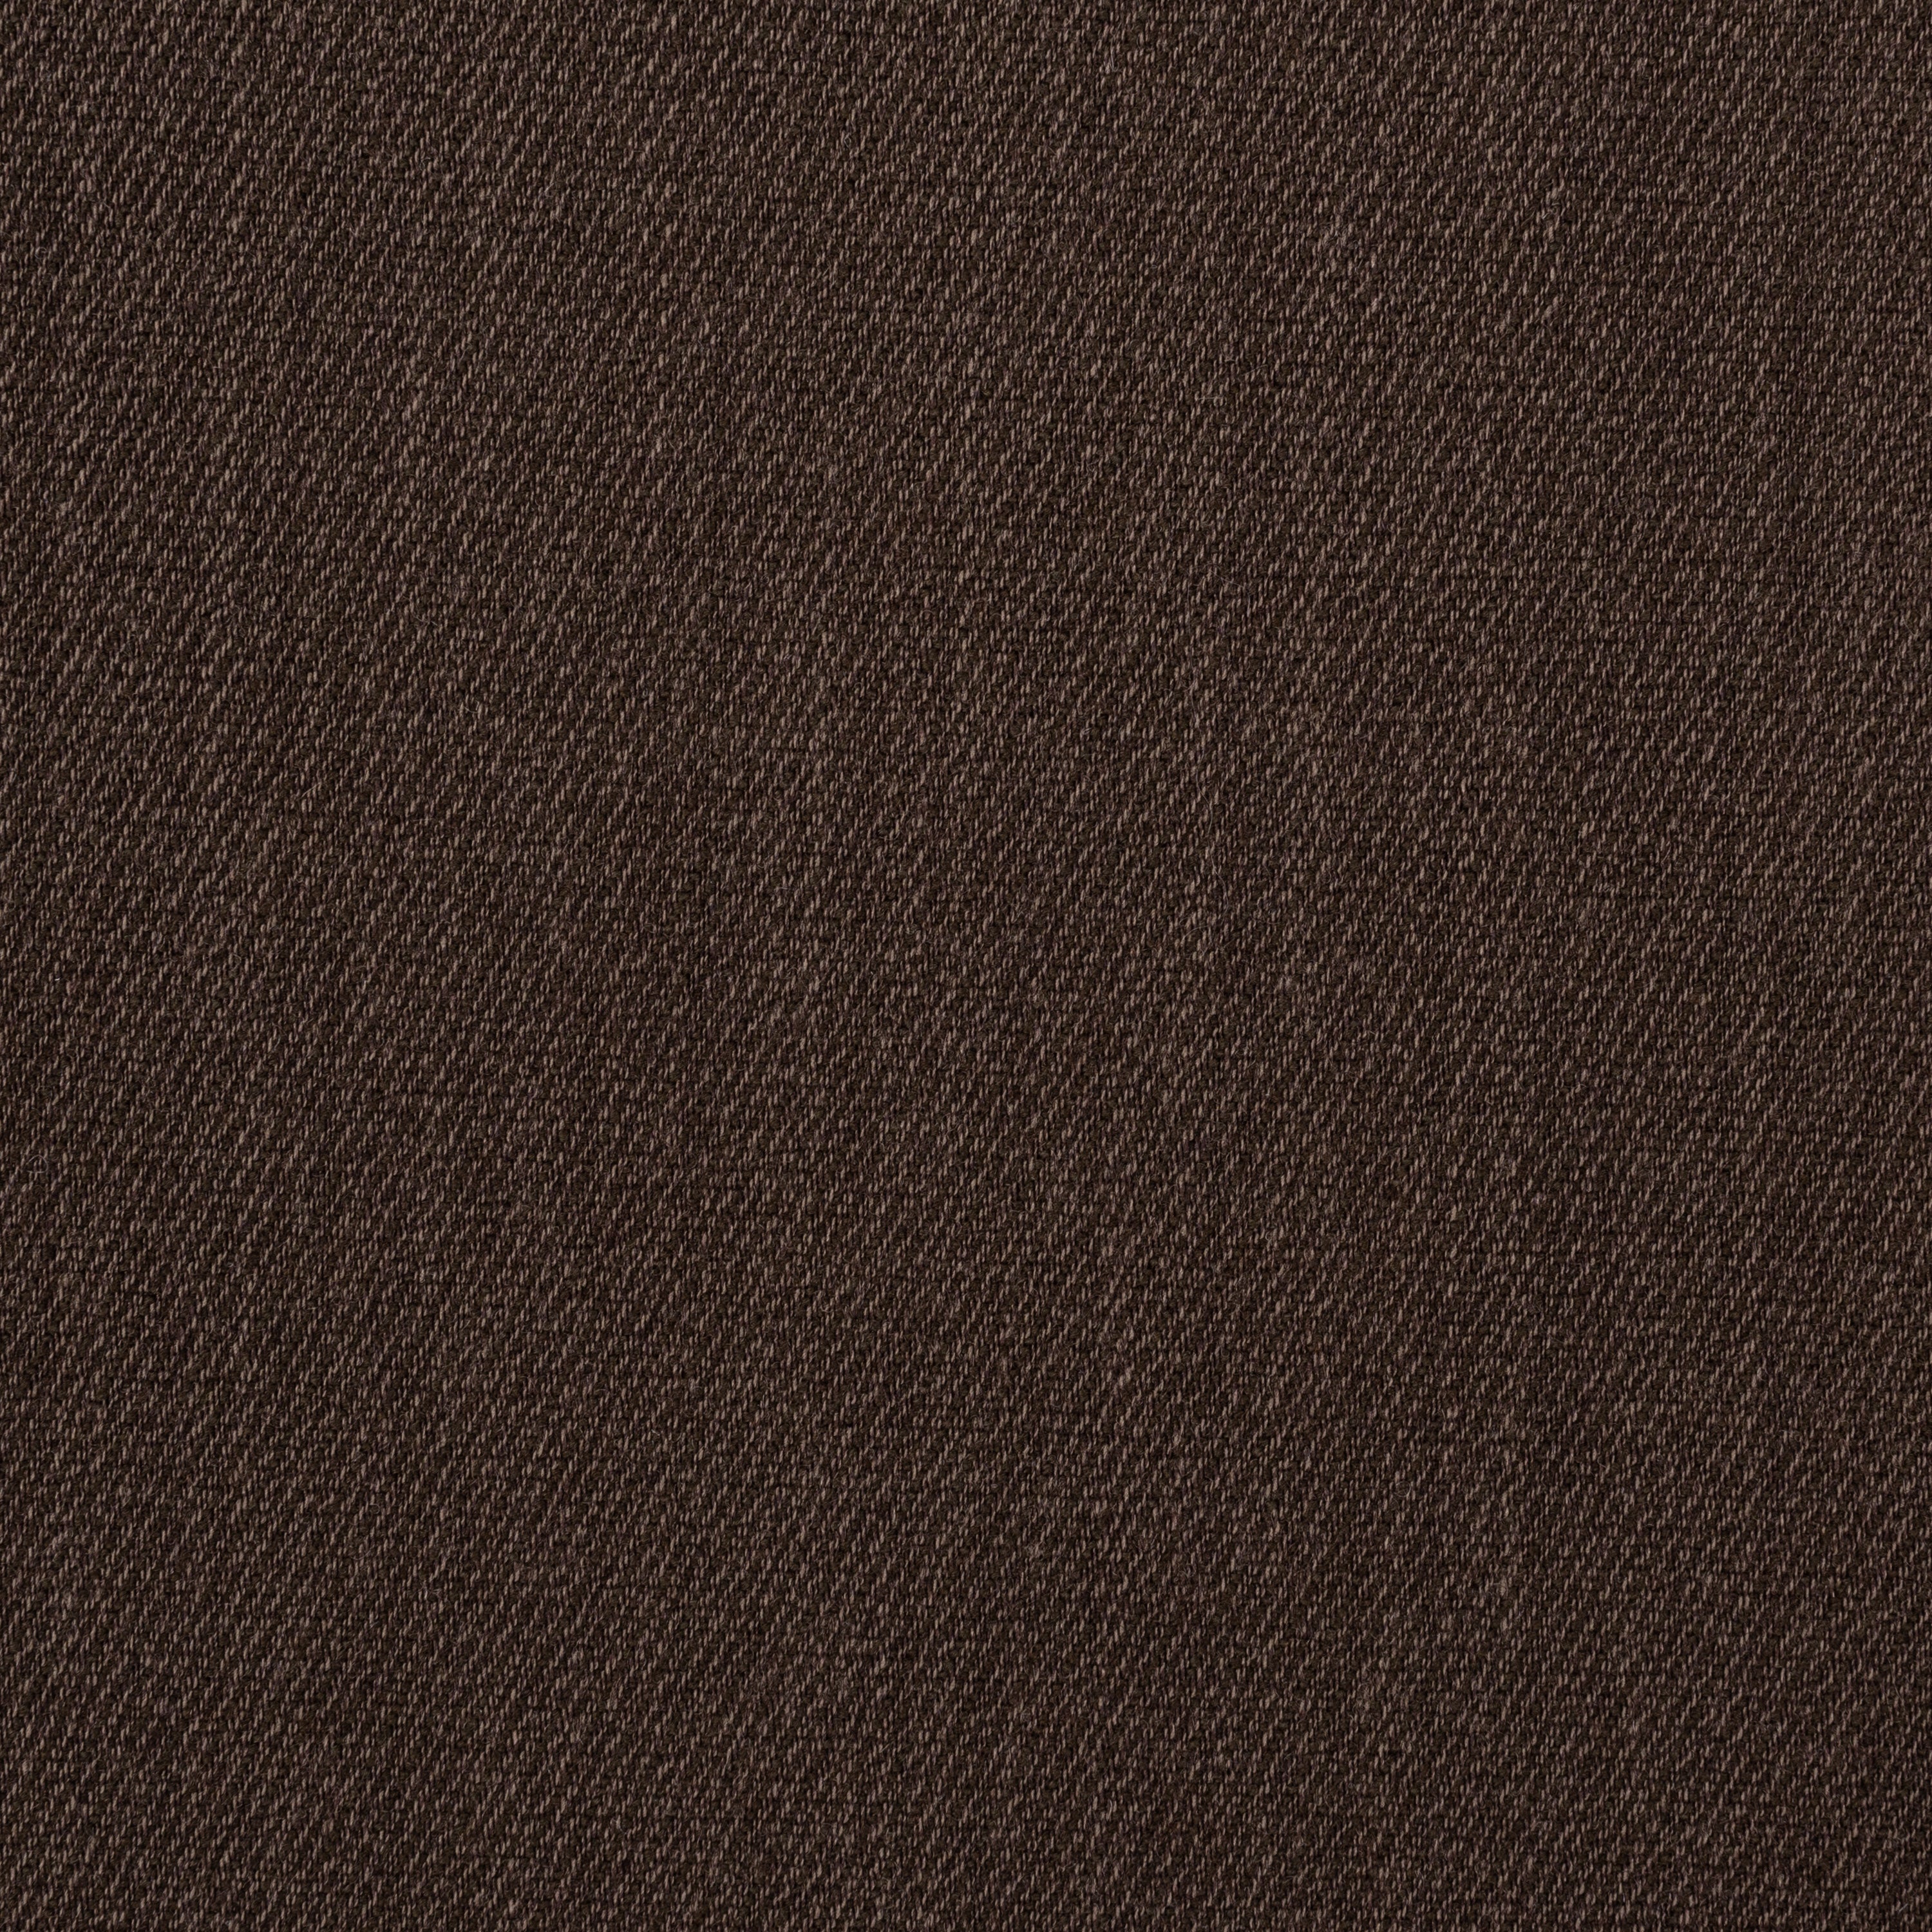 CASTANGIA 1850 Brown Wool Twill 3 Button Suit EU 52 NEW US 42 CASTANGIA